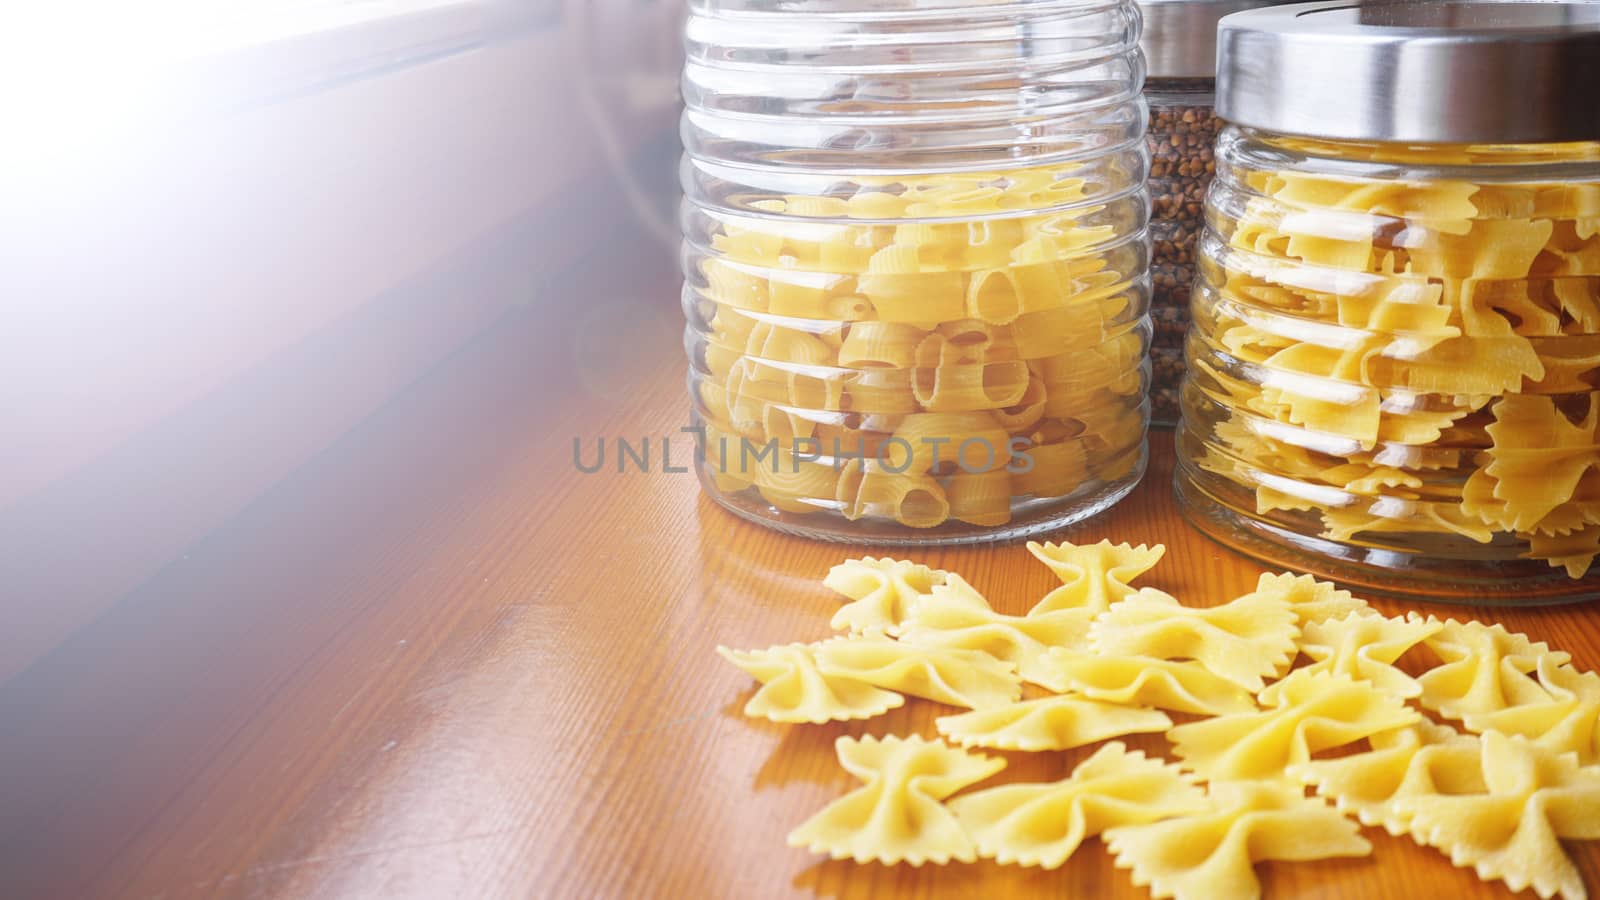 Pasta in the form of bows scattered from glass jar. Italian handmade pasta on the wooden background.